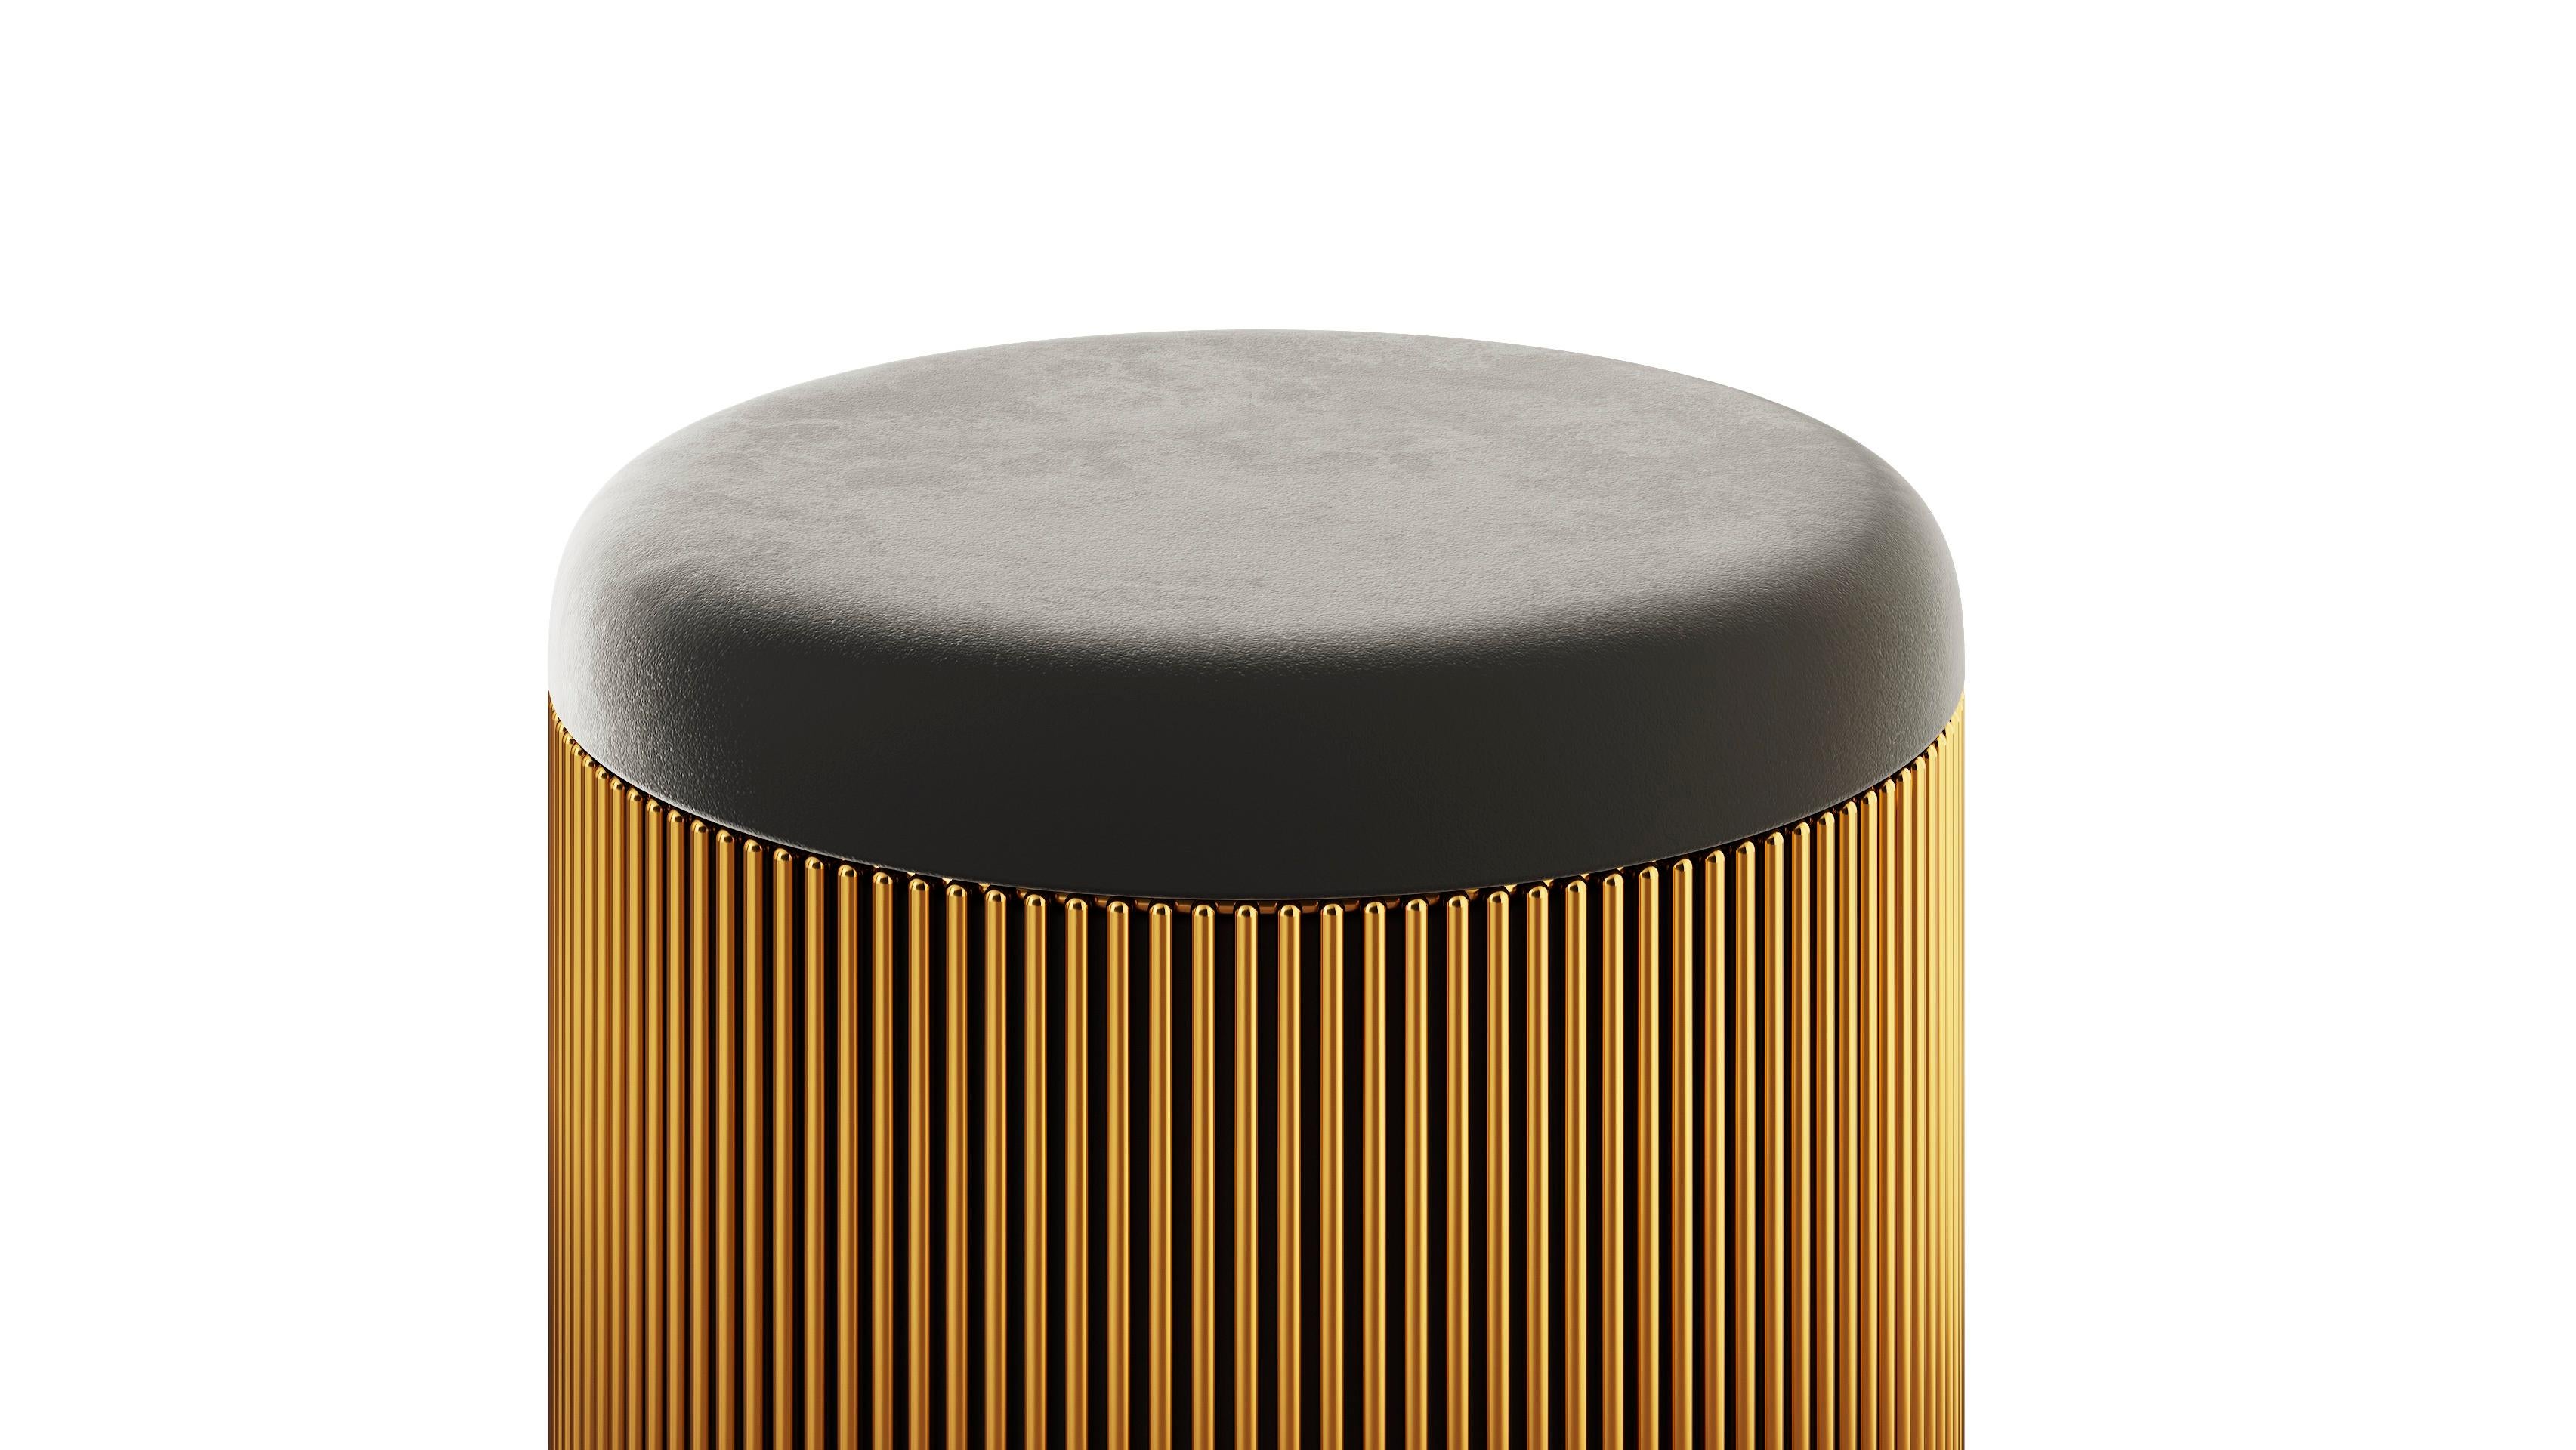 Strings gold pouf with black velvet by Nika Zupanc is a small, pretty seat with gold steel lace around it and can be matched with the exquisite Strings Beauty Table.

The word strings evokes a vision of lightness in our minds. Be it the strings of